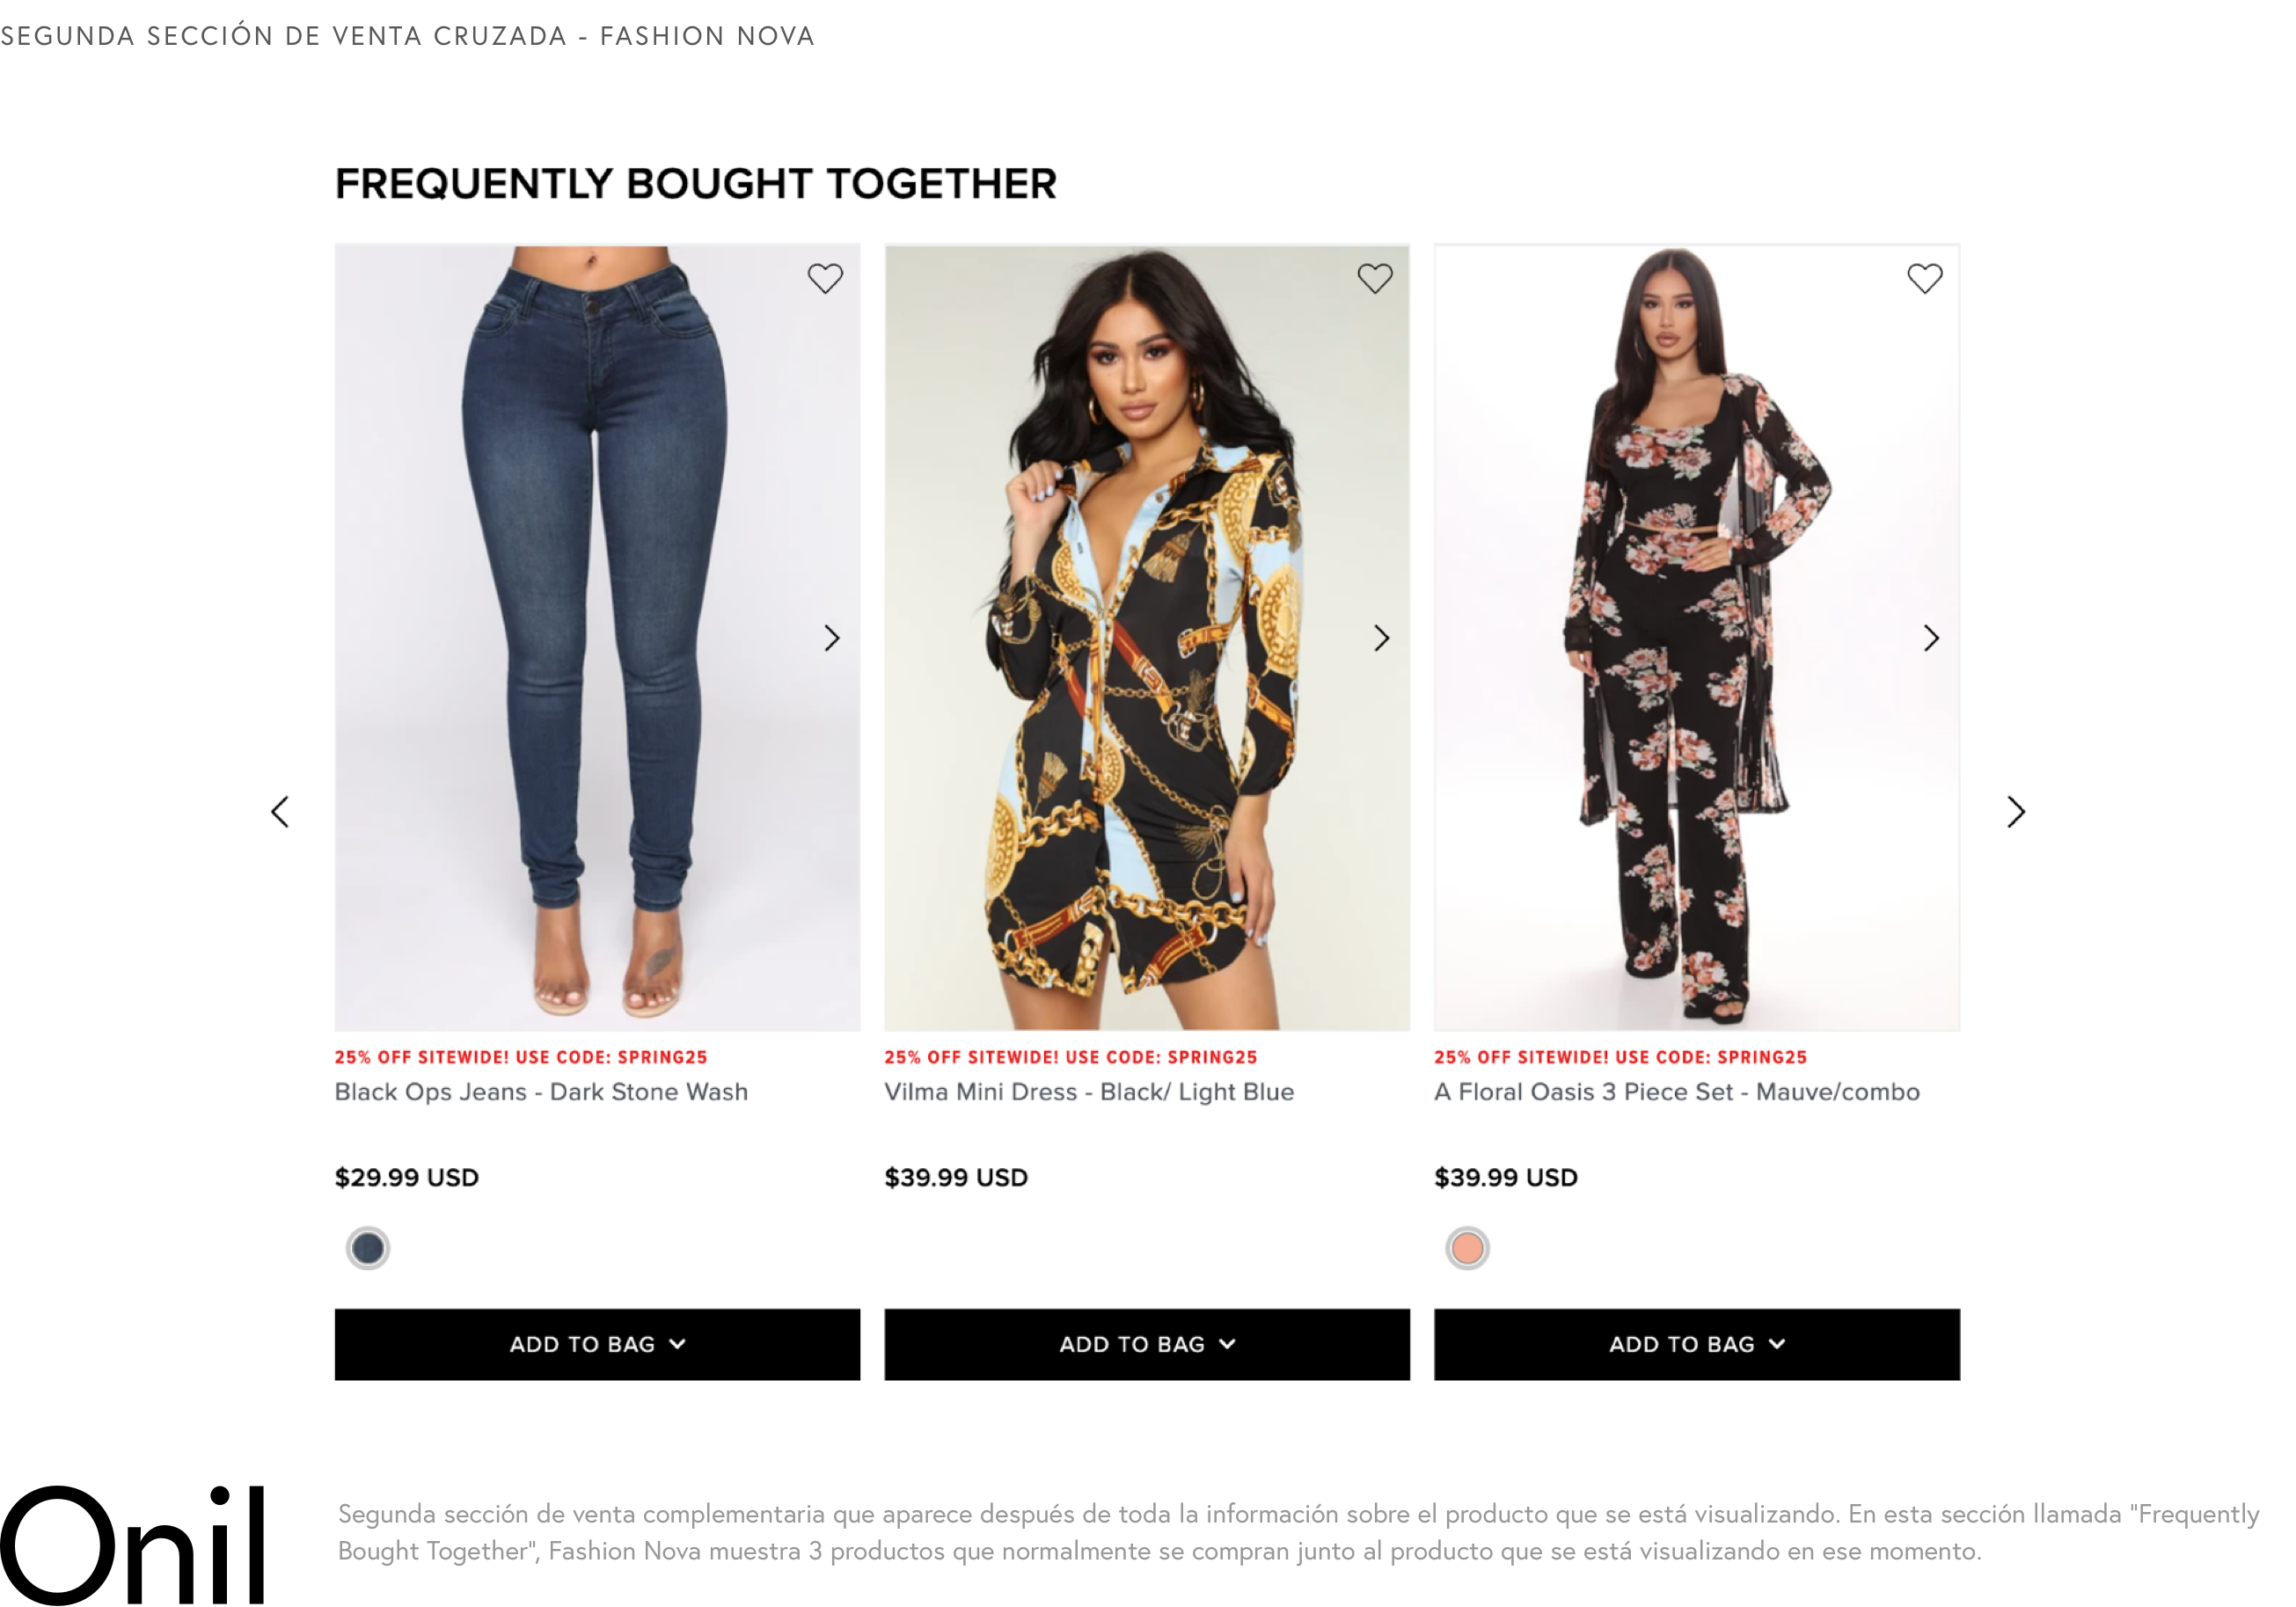 Second Cross-Sell Section in Fashion Nova - In this section called “Frequently Bought Together”, Fashion Nova displays 3 products that are typically purchased alongside the product currently being viewed.